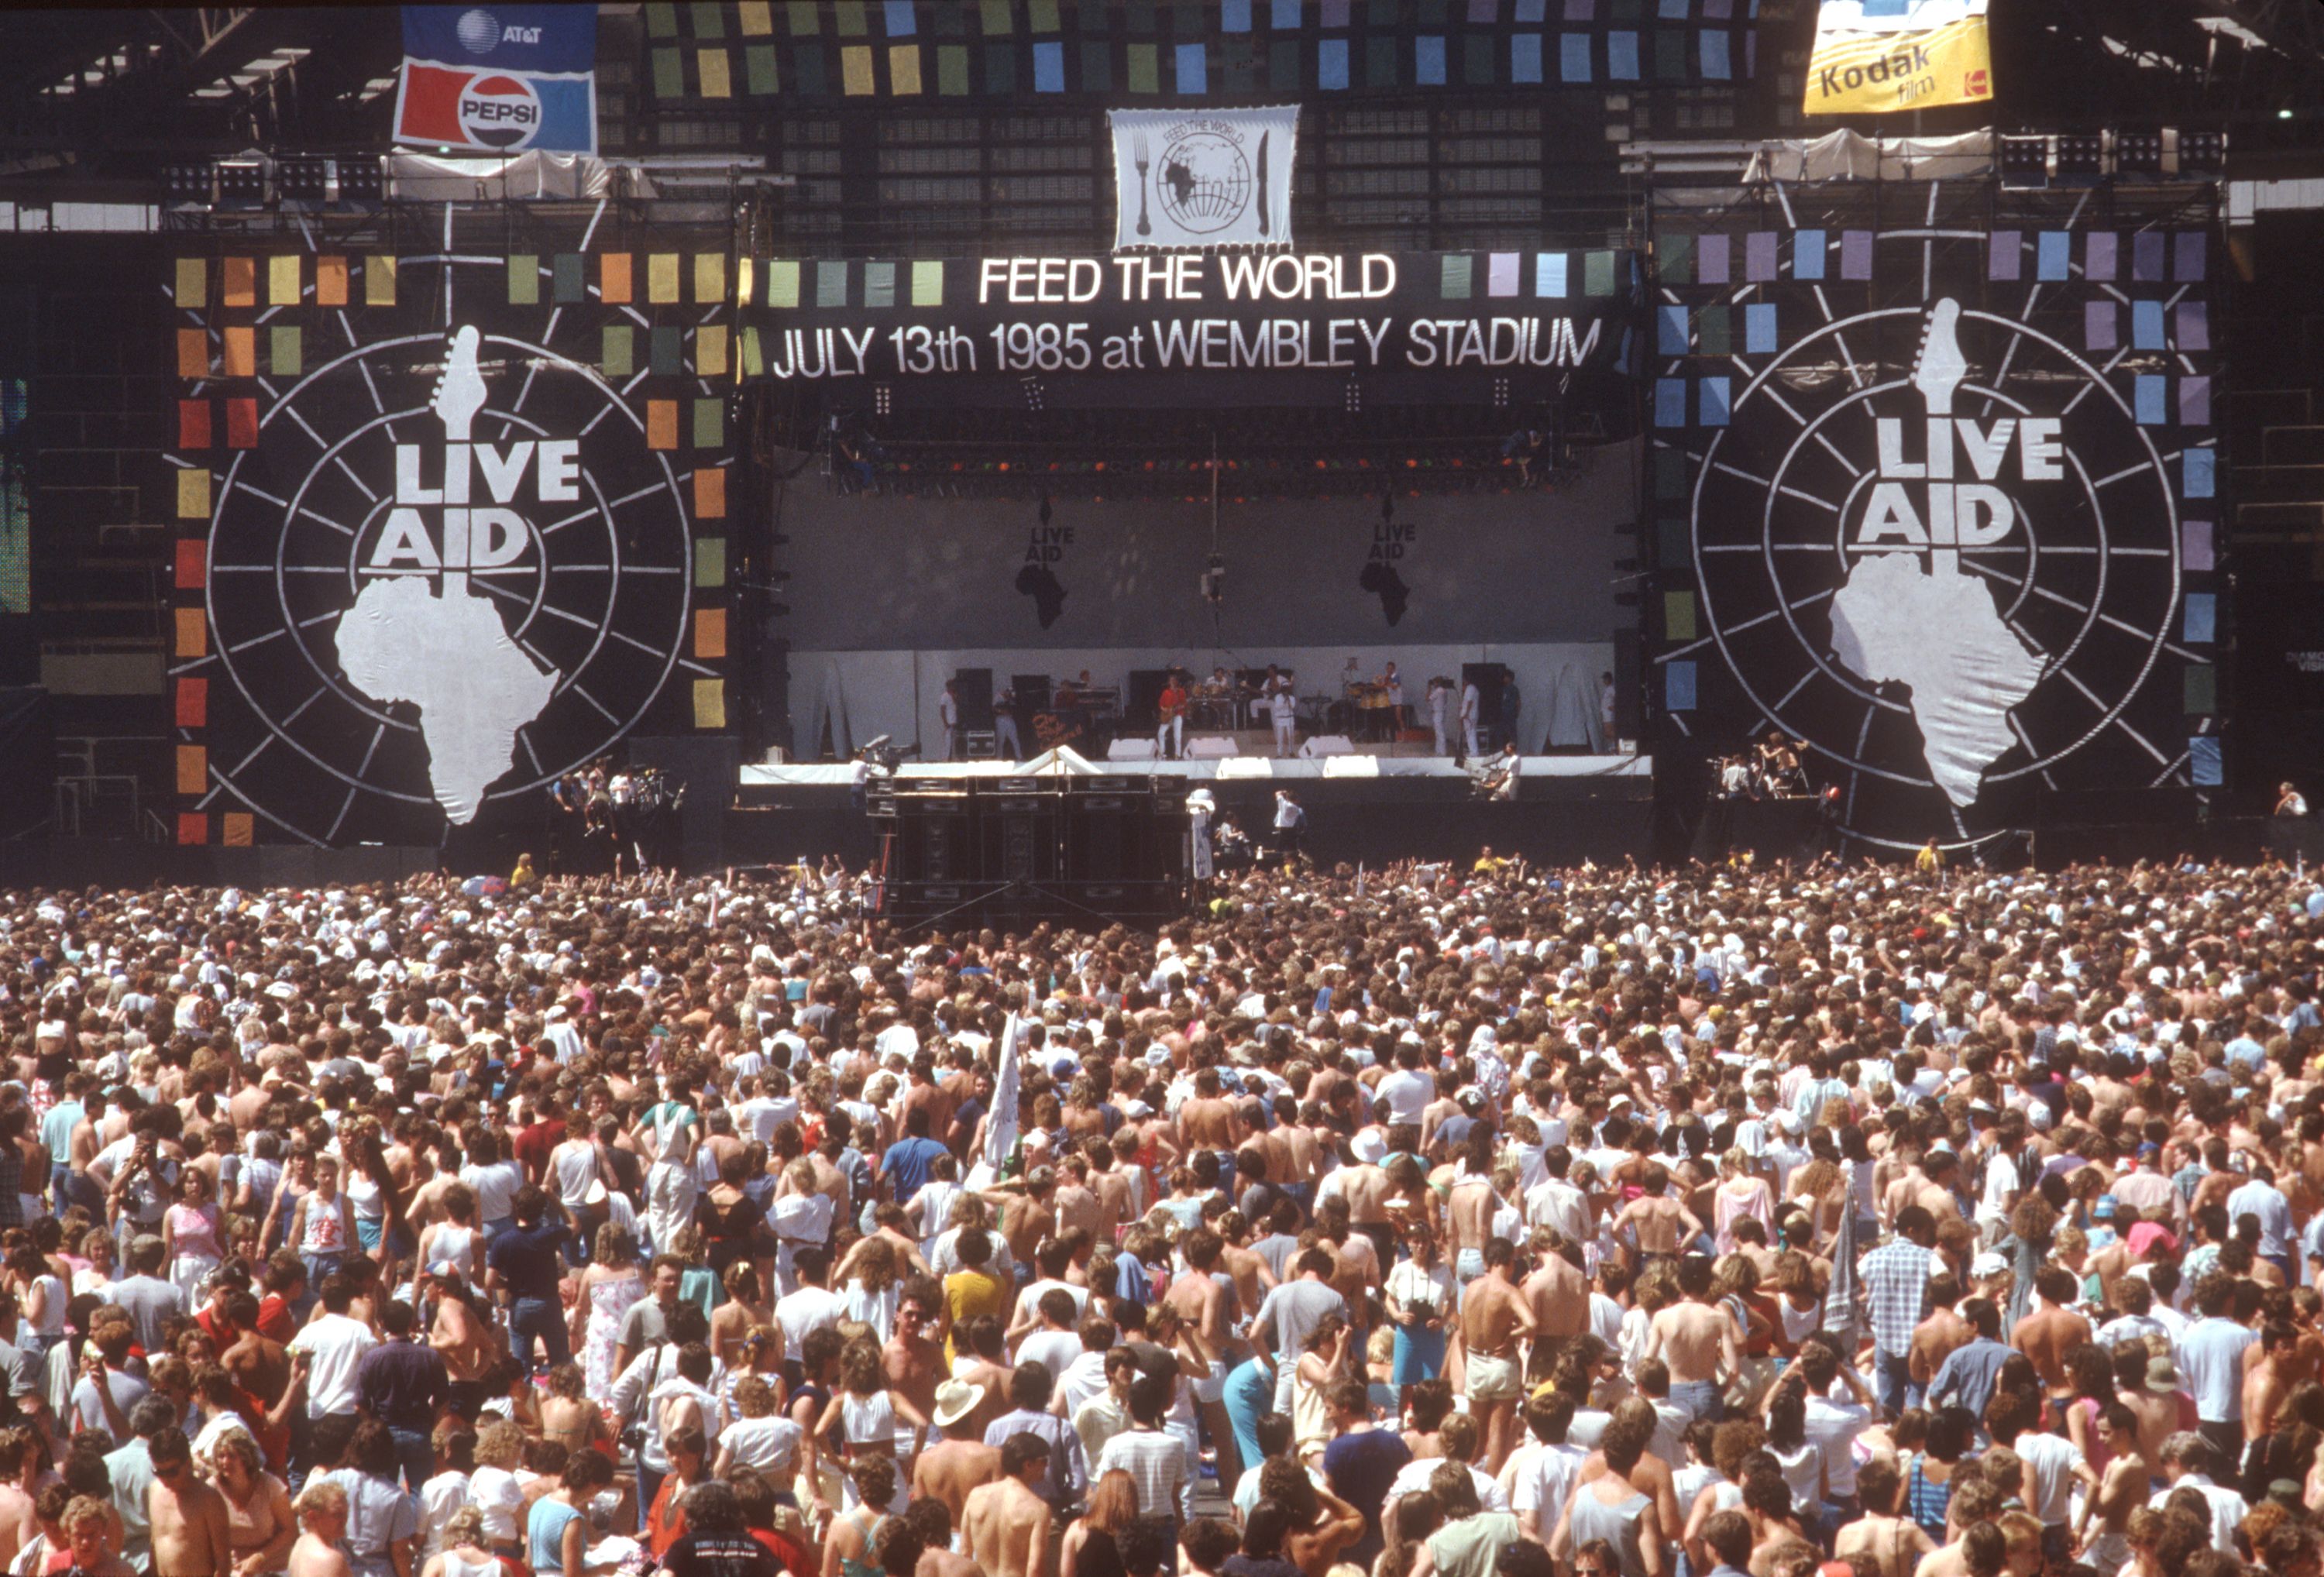 Wembley Stadium packed full of music fans for Live Aid 1985.